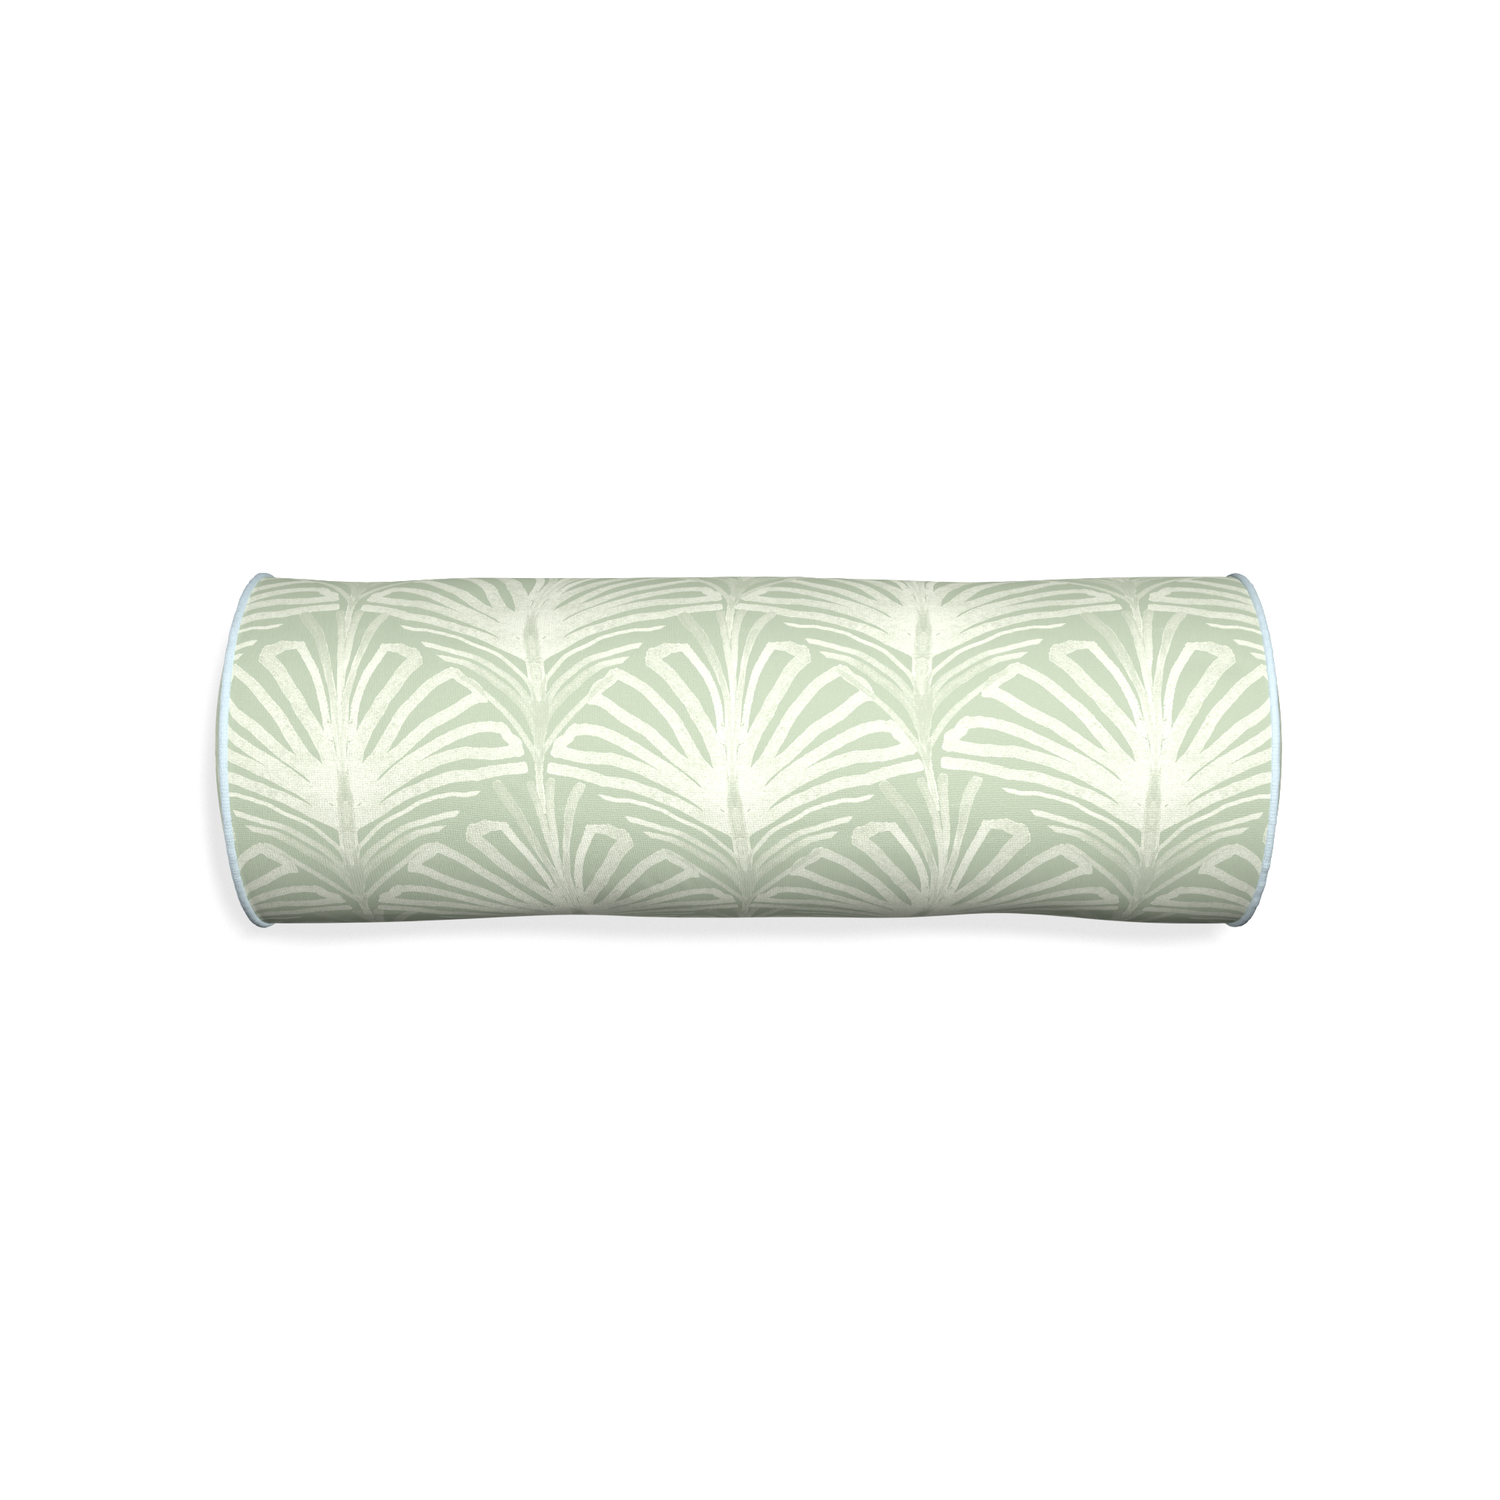 Bolster suzy sage custom pillow with powder piping on white background